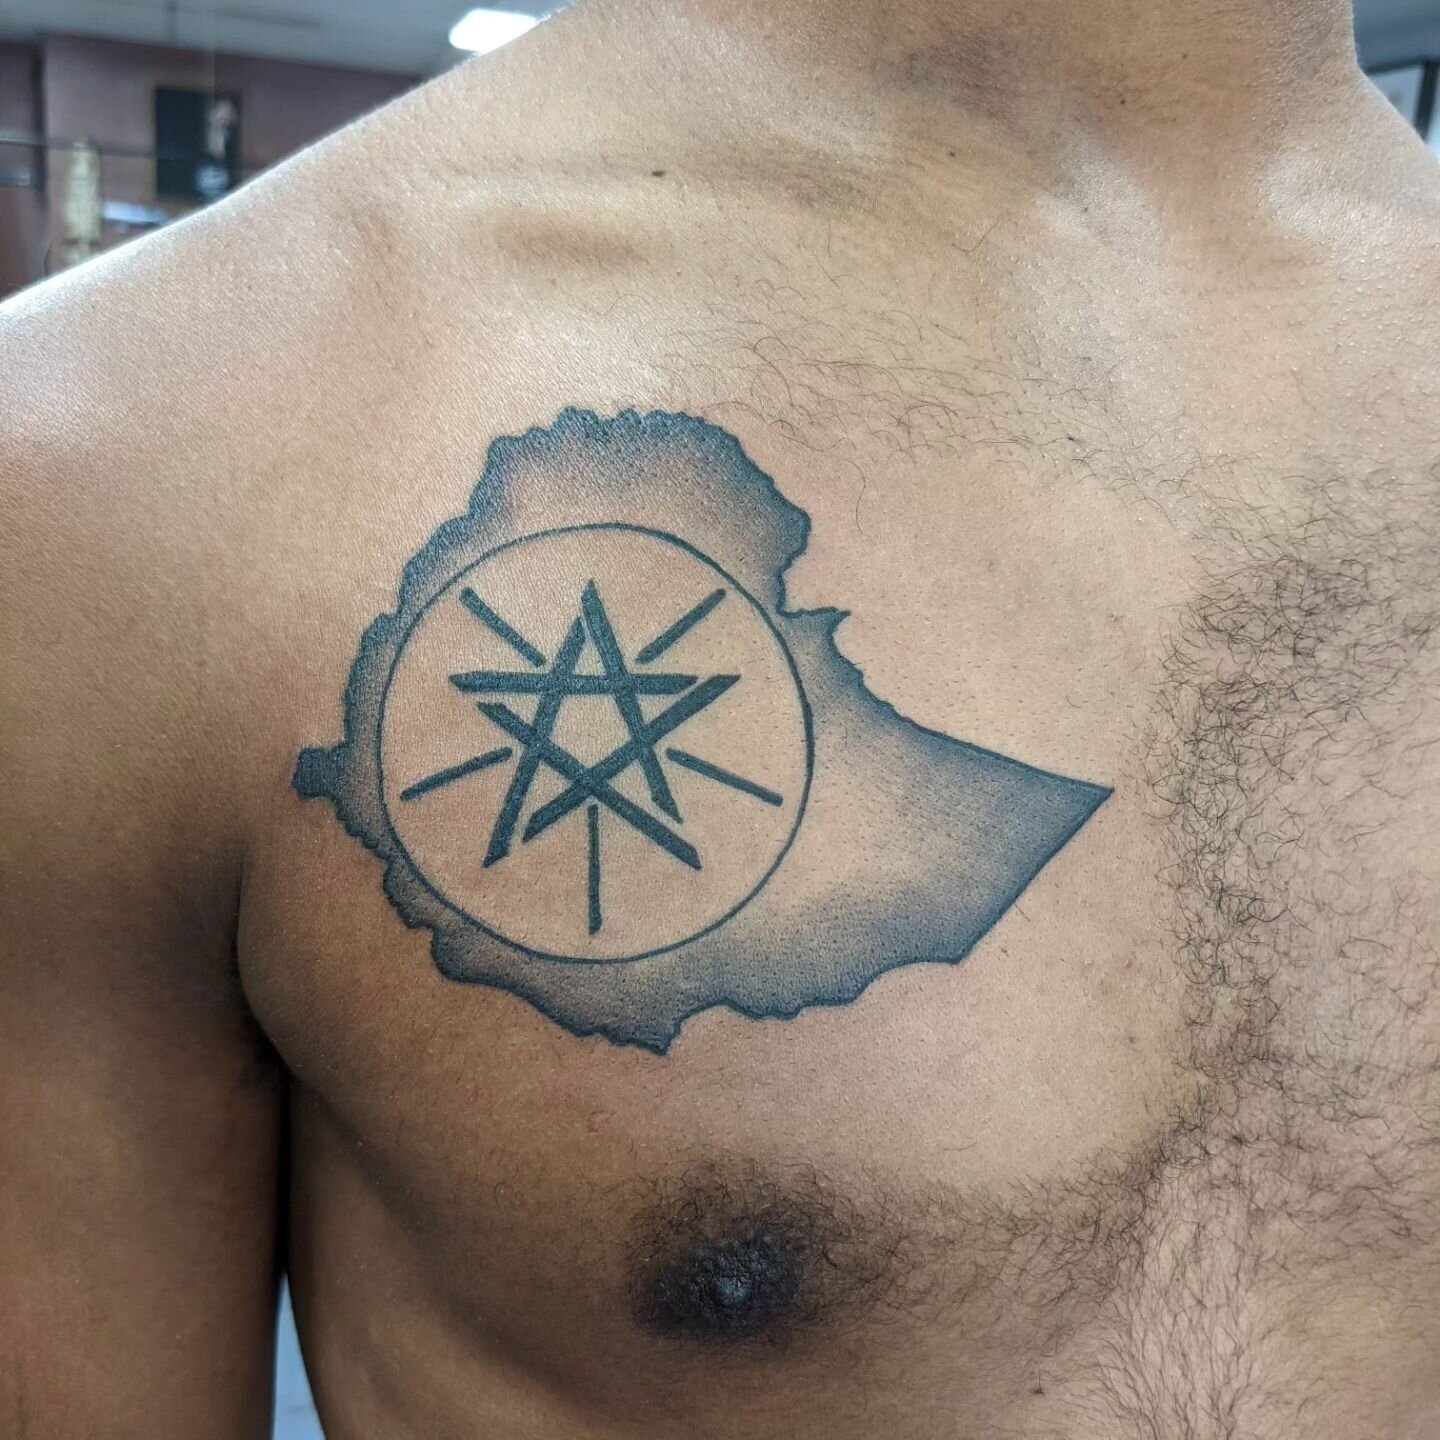 From July '22! The tattoos that remind us of friends and of home. Thanks everyone! 

.
.
.
.
.

#tattoos #instagramartists #tattoosoninstagram #flagtattoo #ethiopia🇪🇹 #startattoo #moontattoo  #mountaintattoo #flowertattoos #friendshiptattoo #tribal